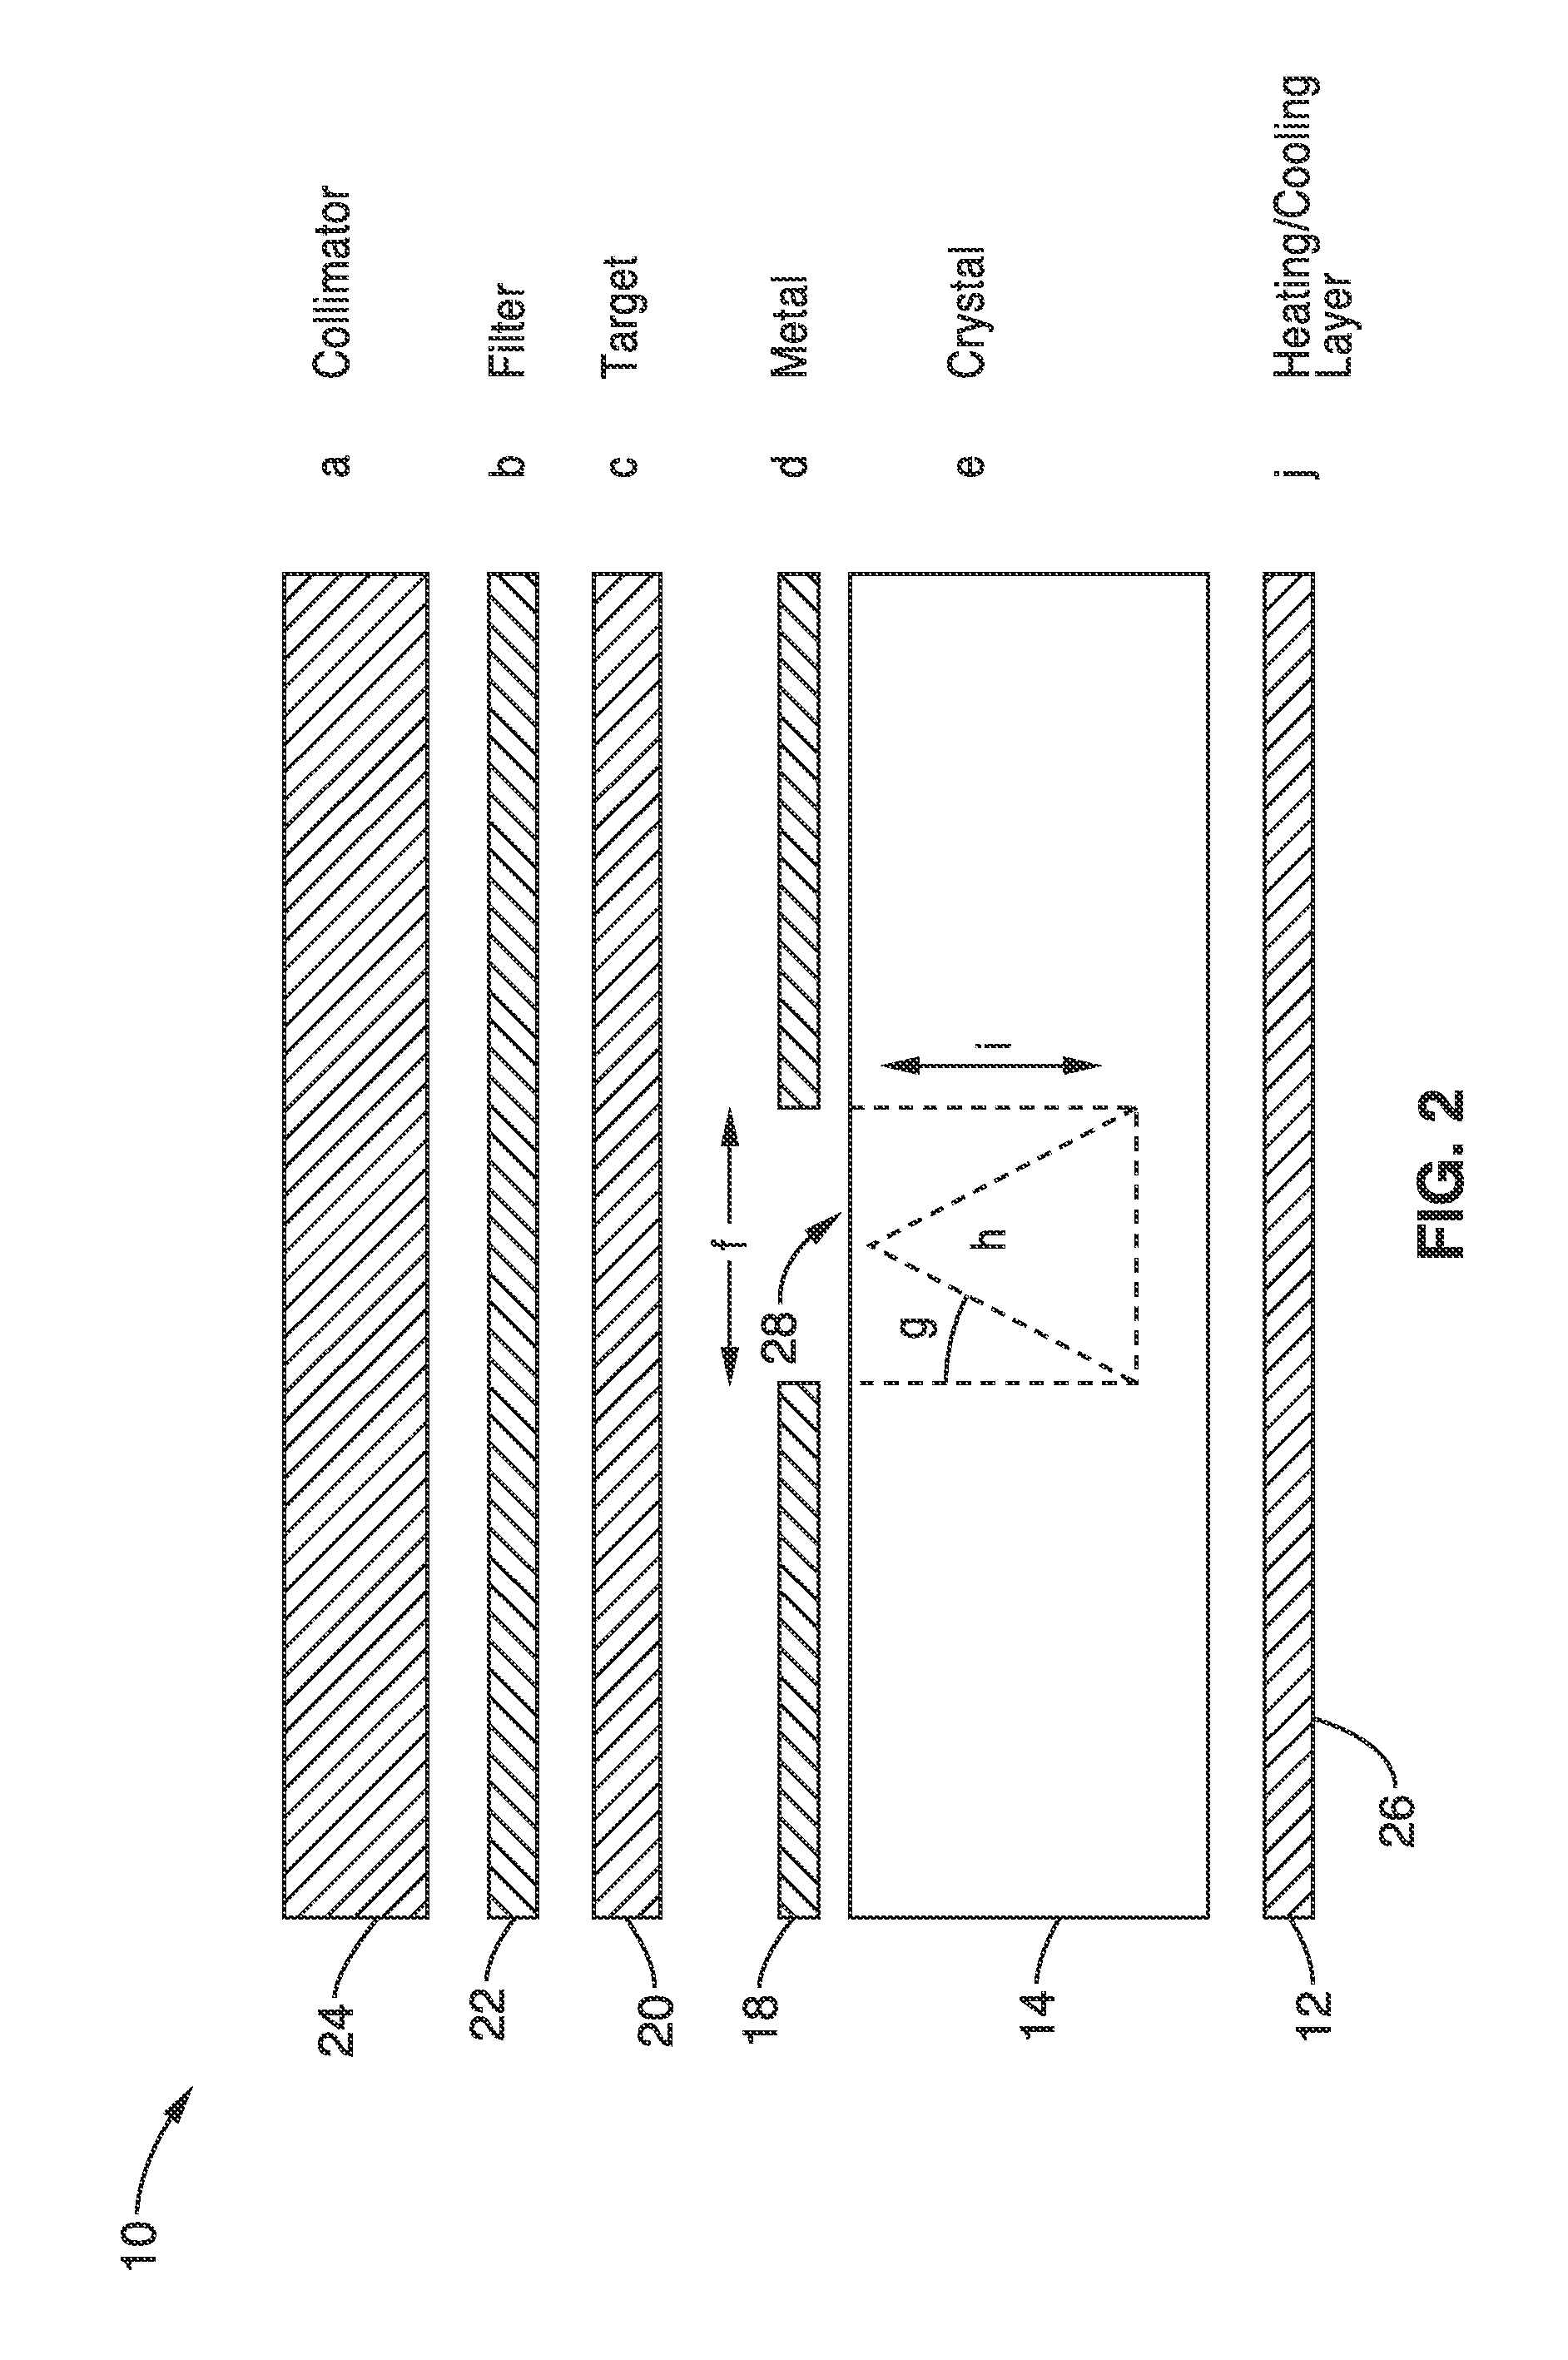 Apparatus for producing x-rays for use in imaging